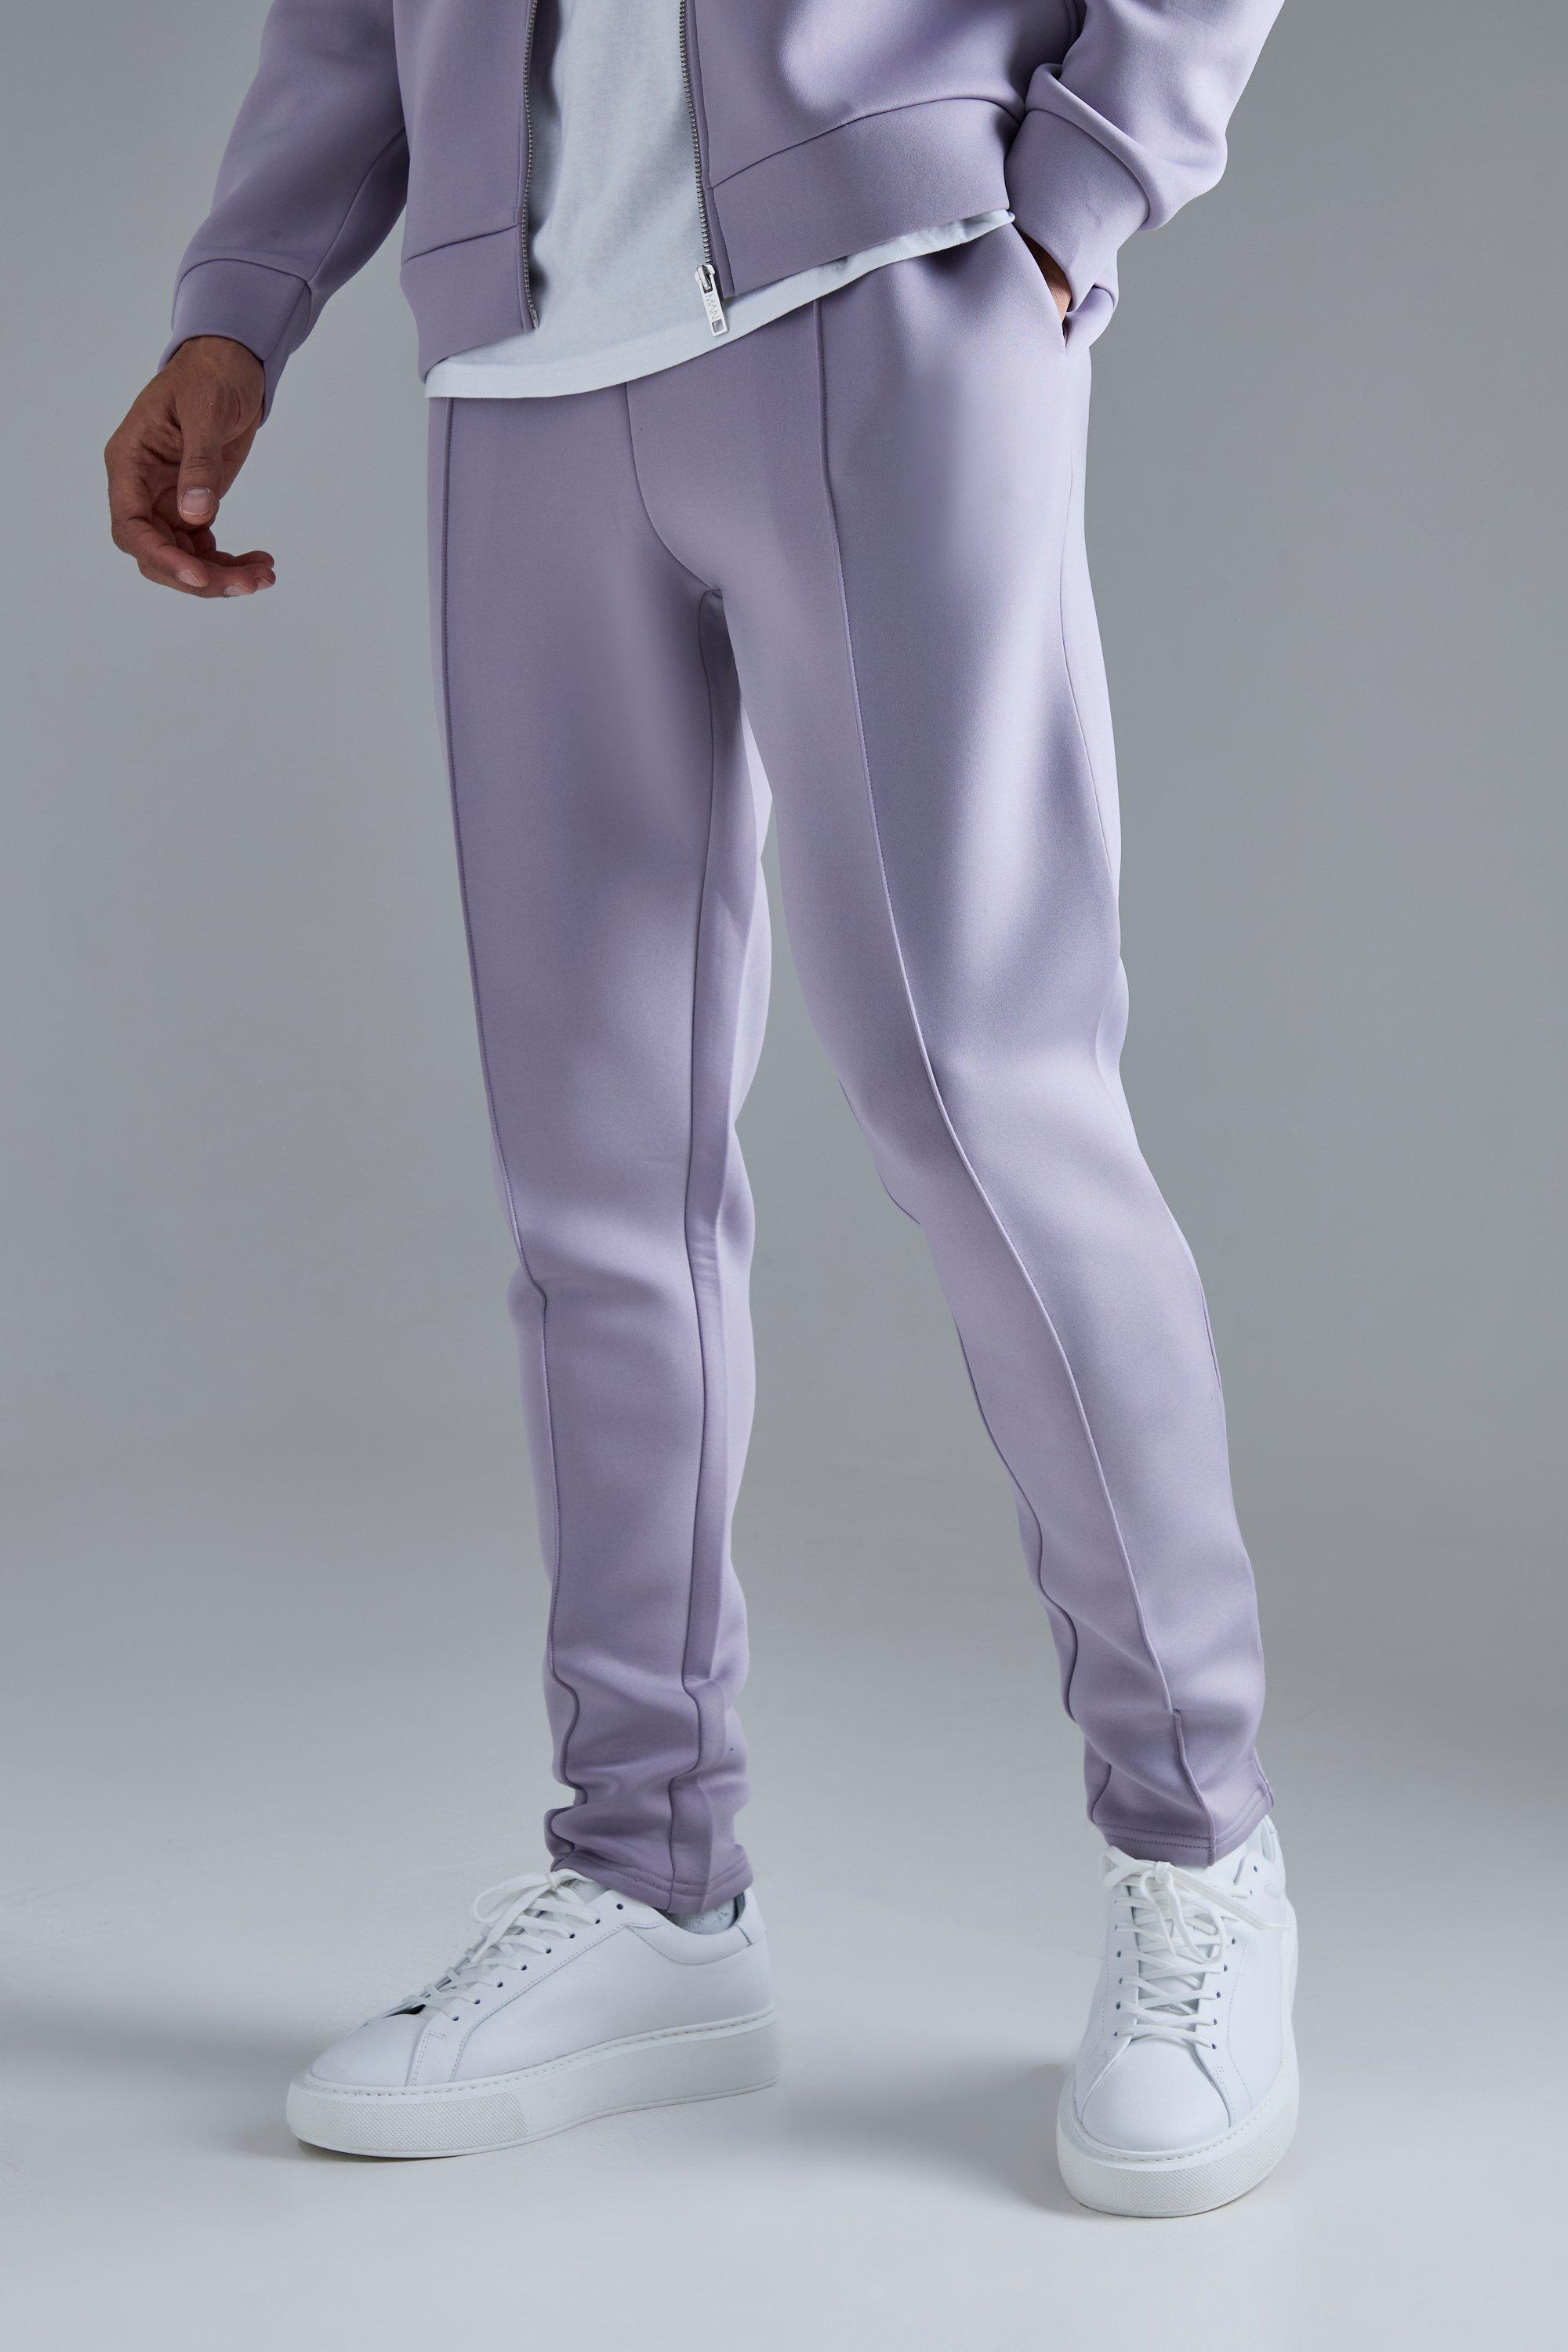 BoohooMAN Tall Slim Tapered Cropped Bonded Scuba Jogger in White